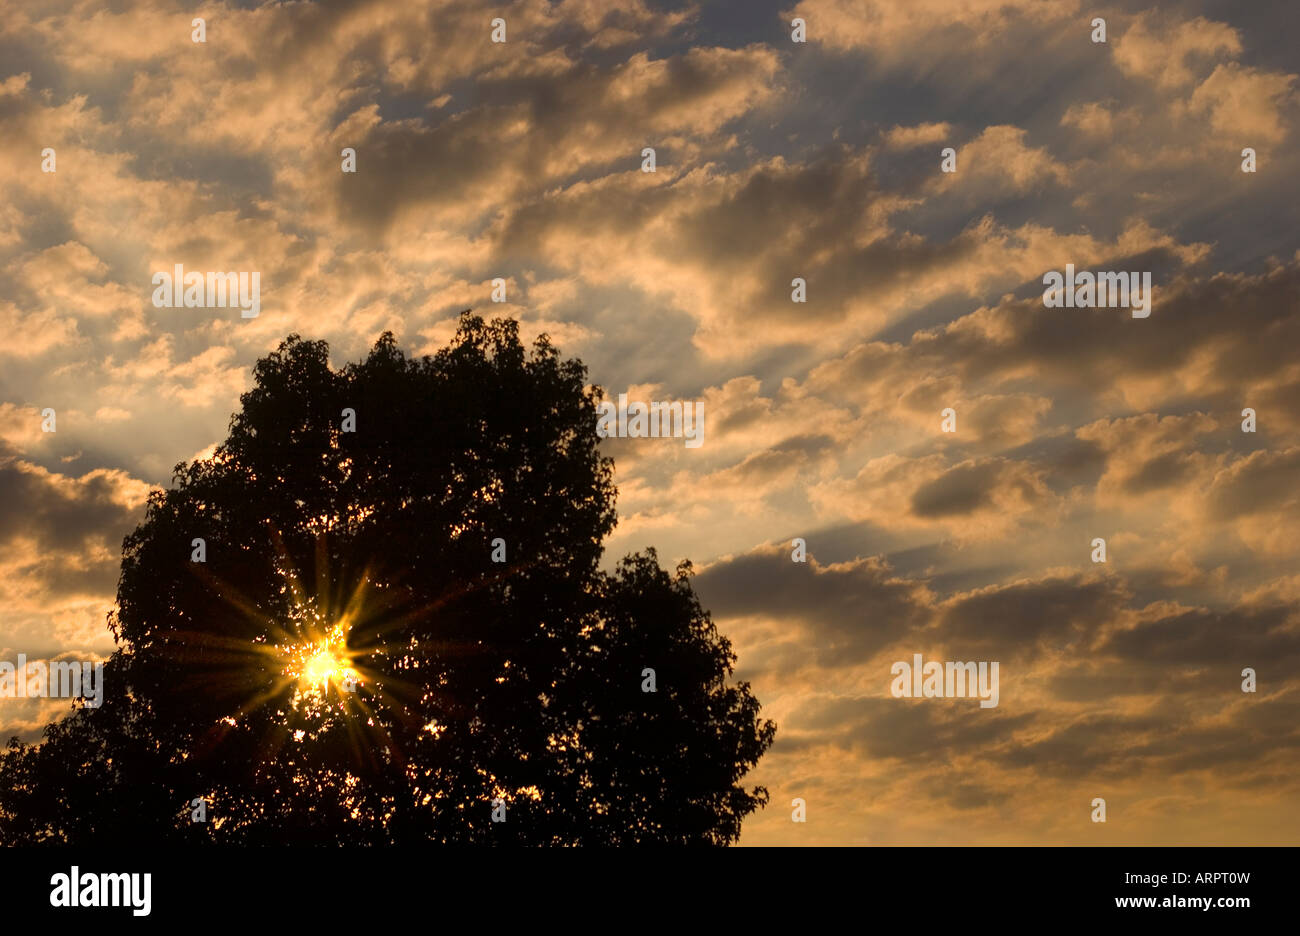 Sunrise shinning through tree with the sky full of clouds Stock Photo